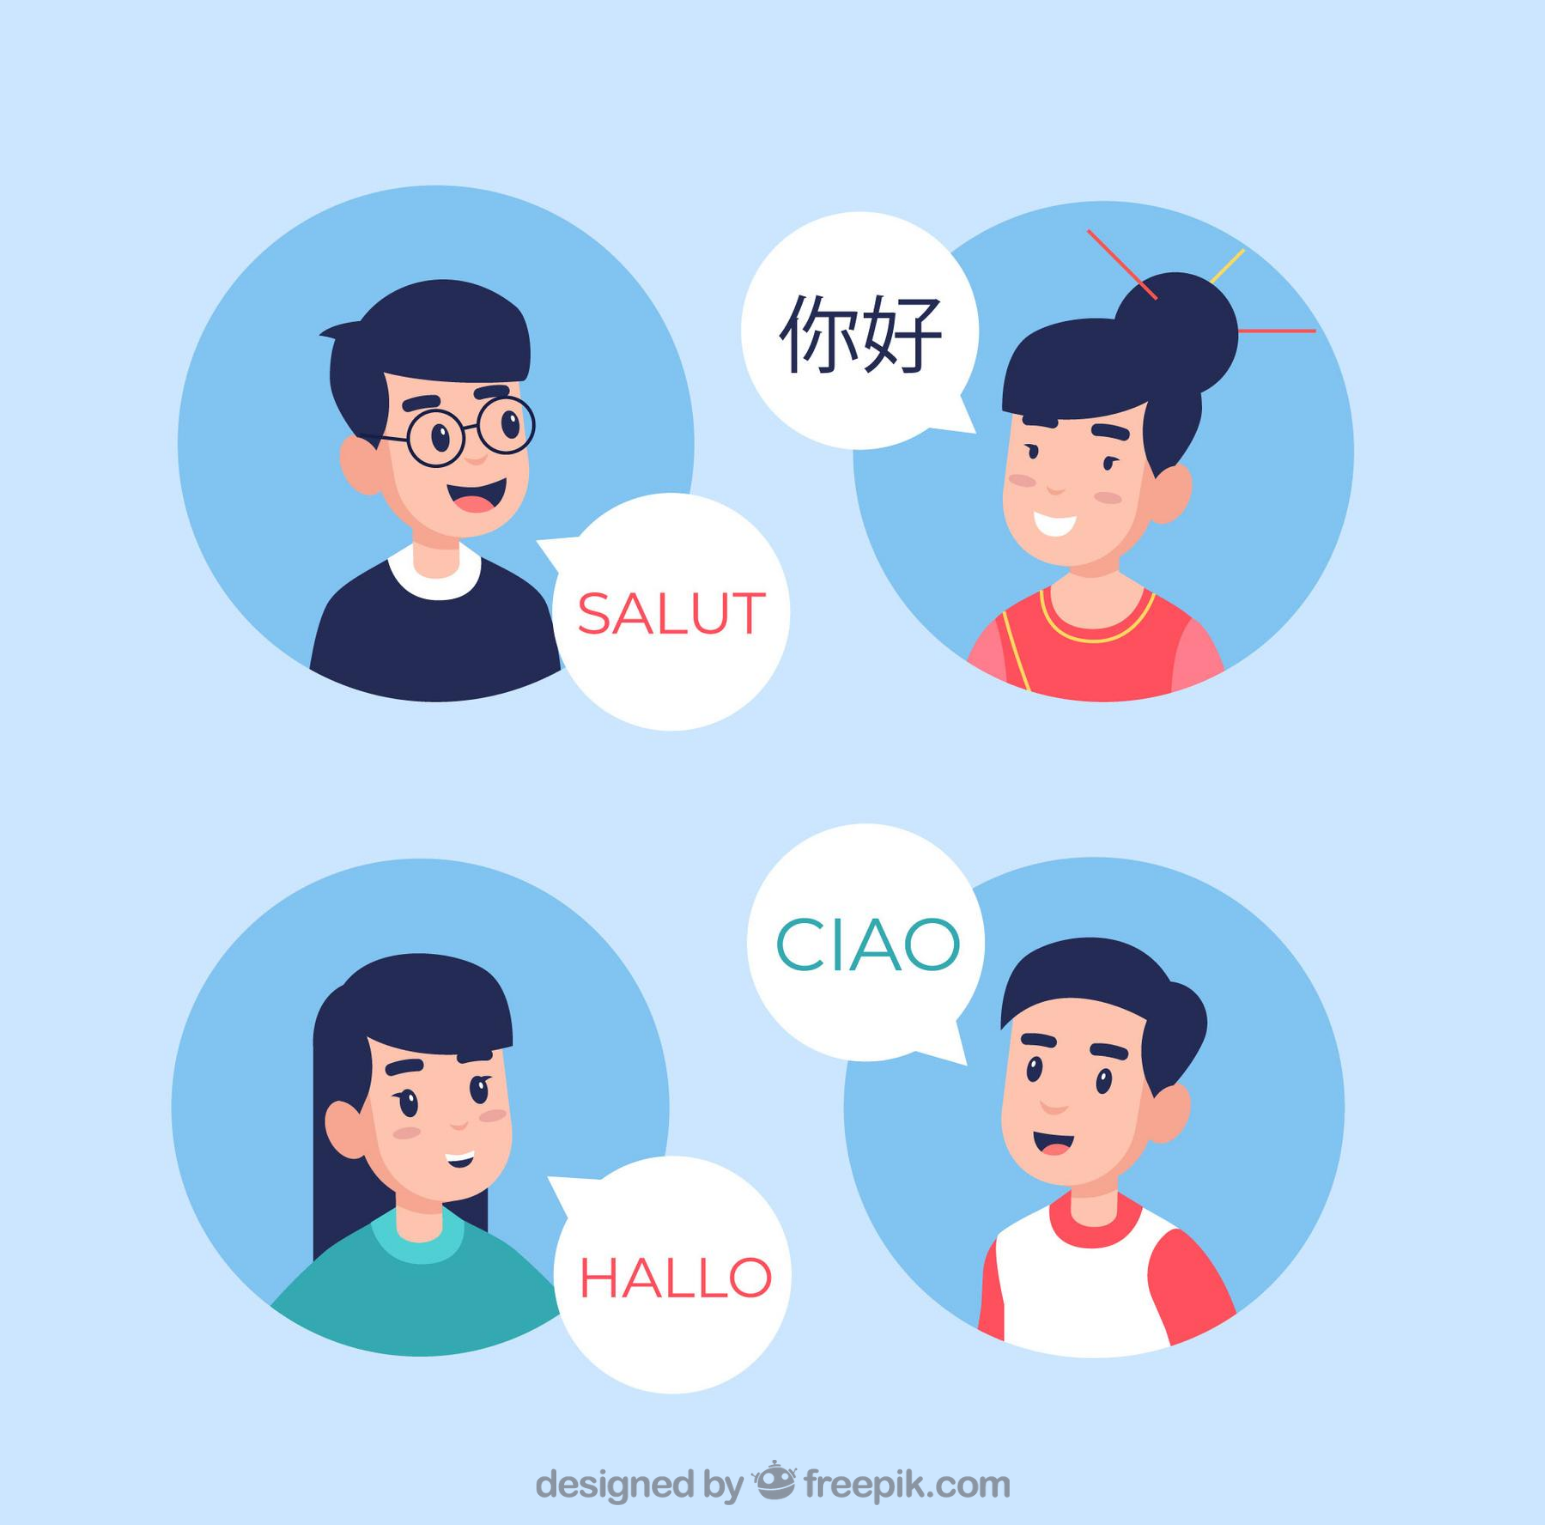 Graphic of four students saying hello in four languages.